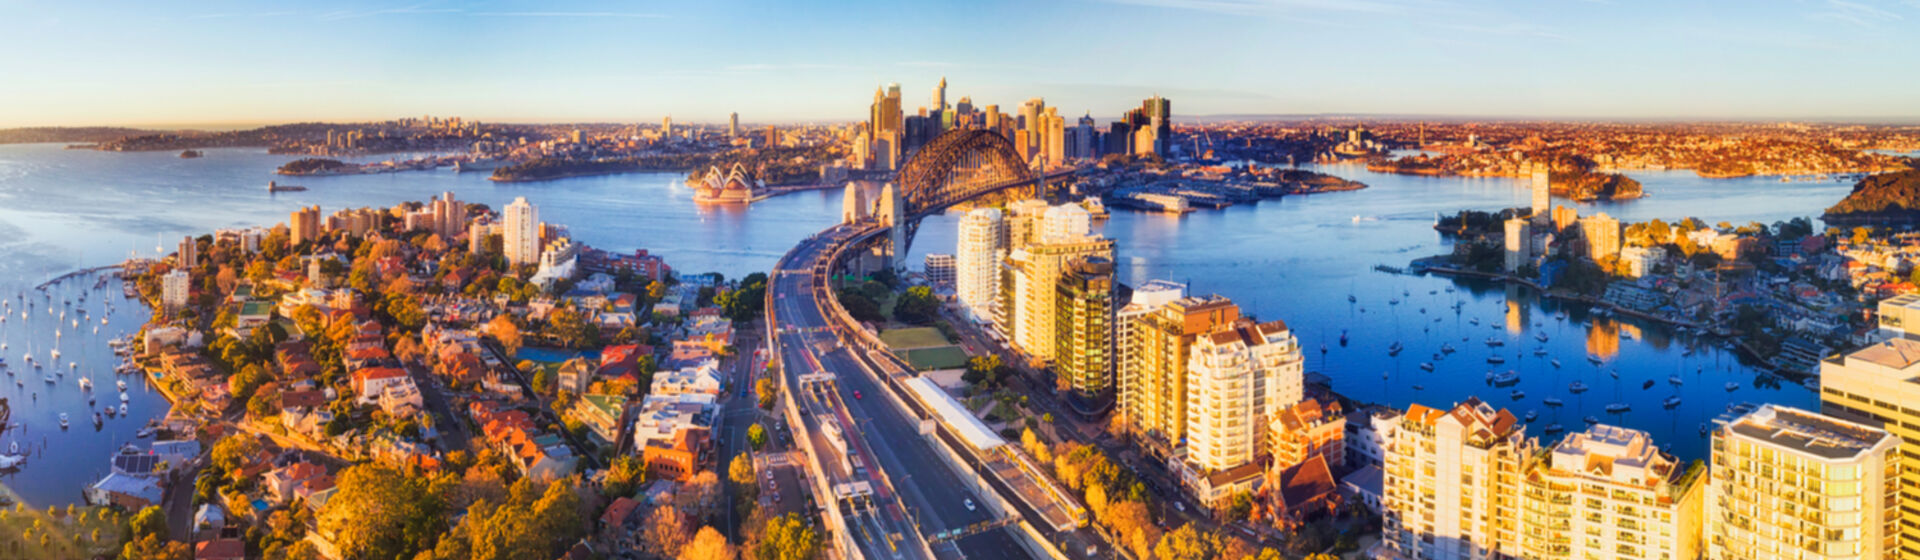 aerial view, sydney city, roads, sunset, day time